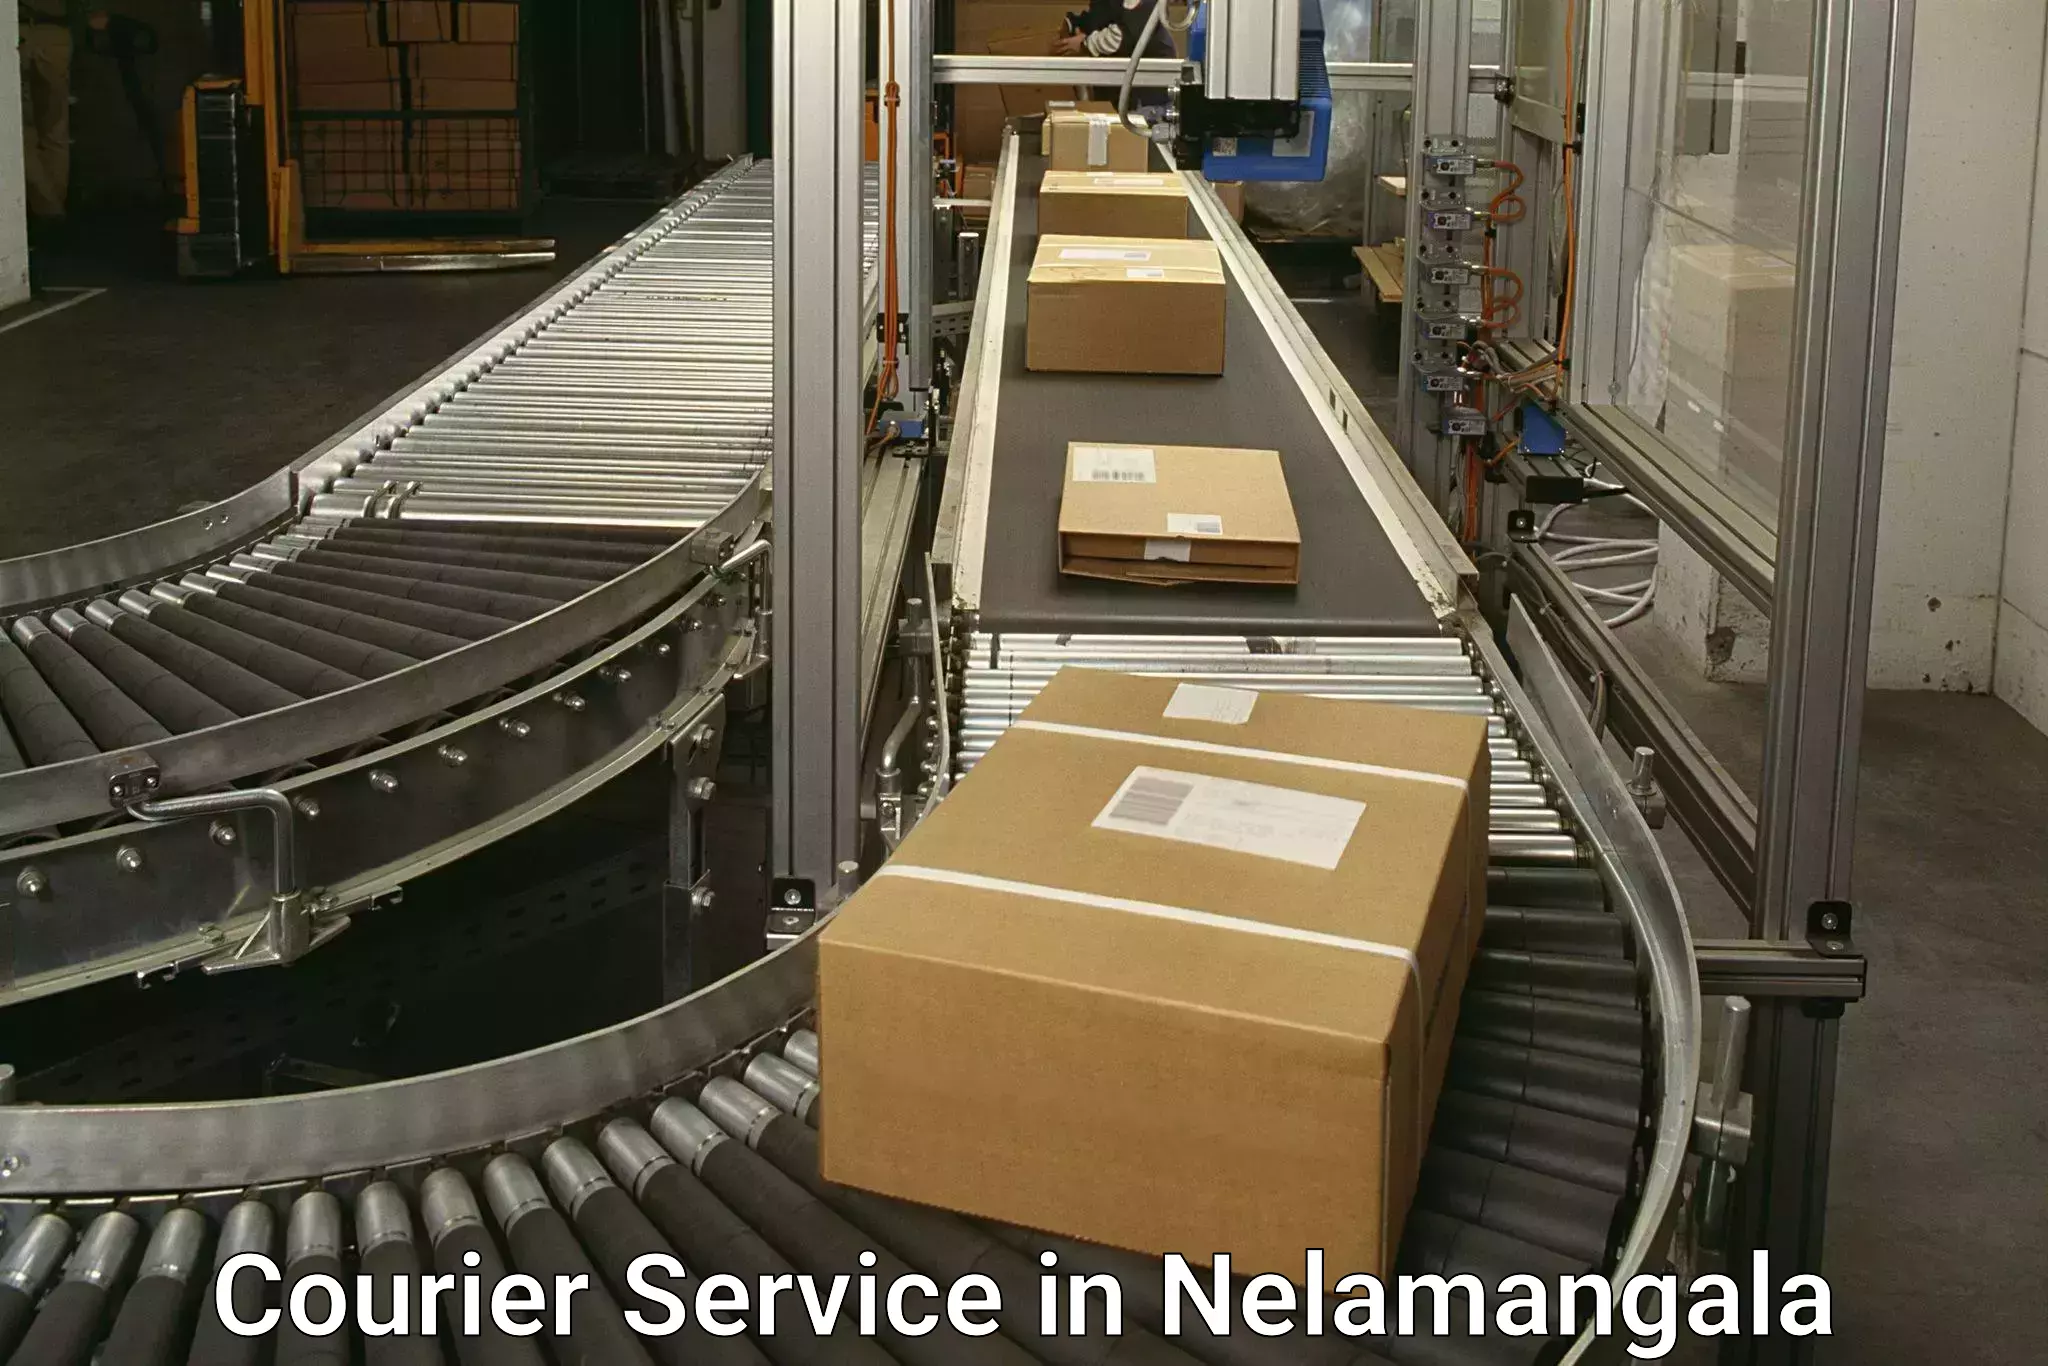 Courier dispatch services in Nelamangala